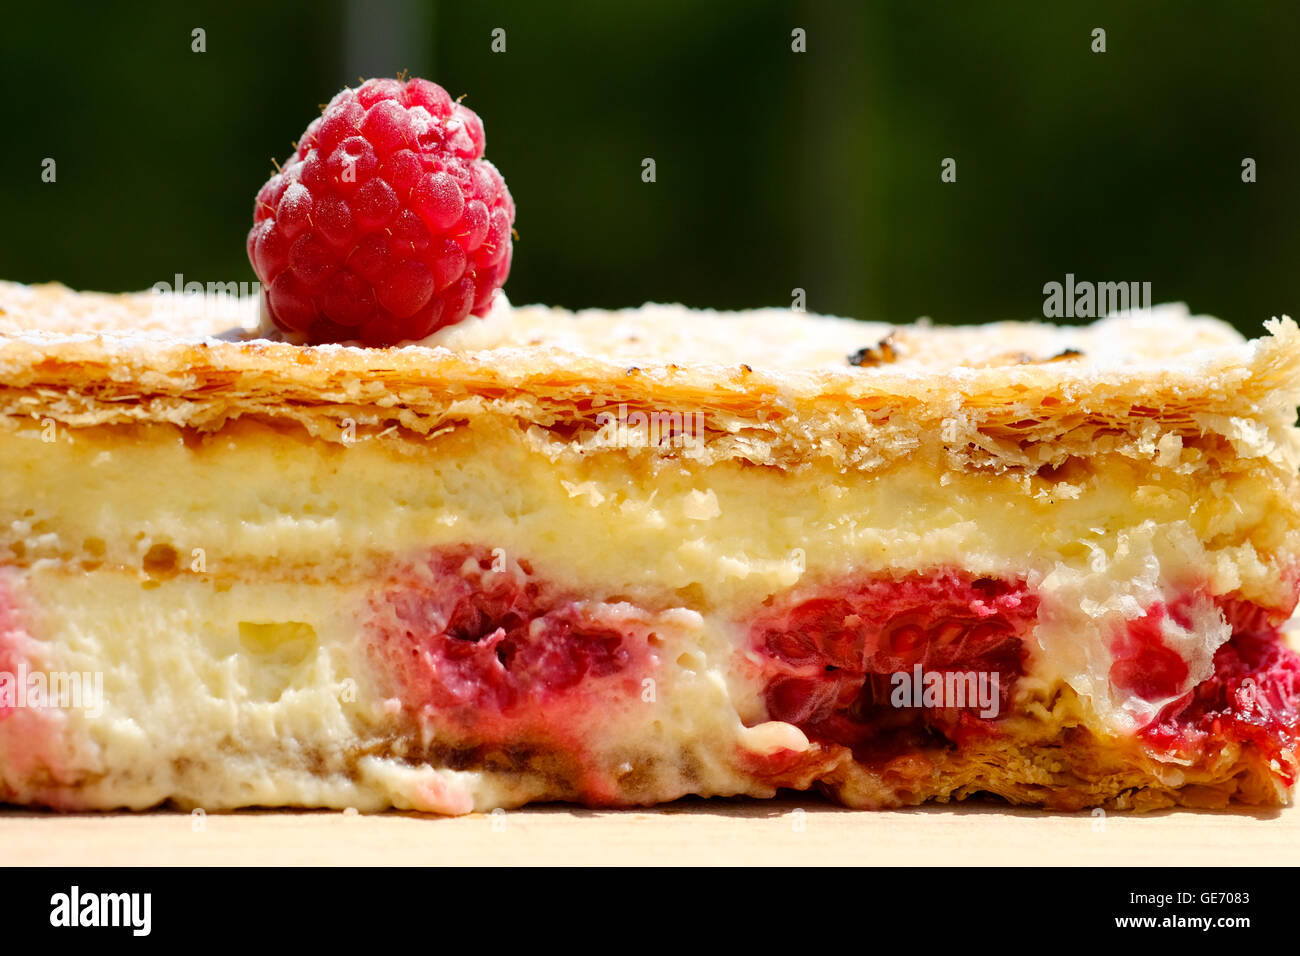 A tasty delicious looking fresh raspberry, puff pastry, cream slice cake decorated with a raspberry on top Stock Photo